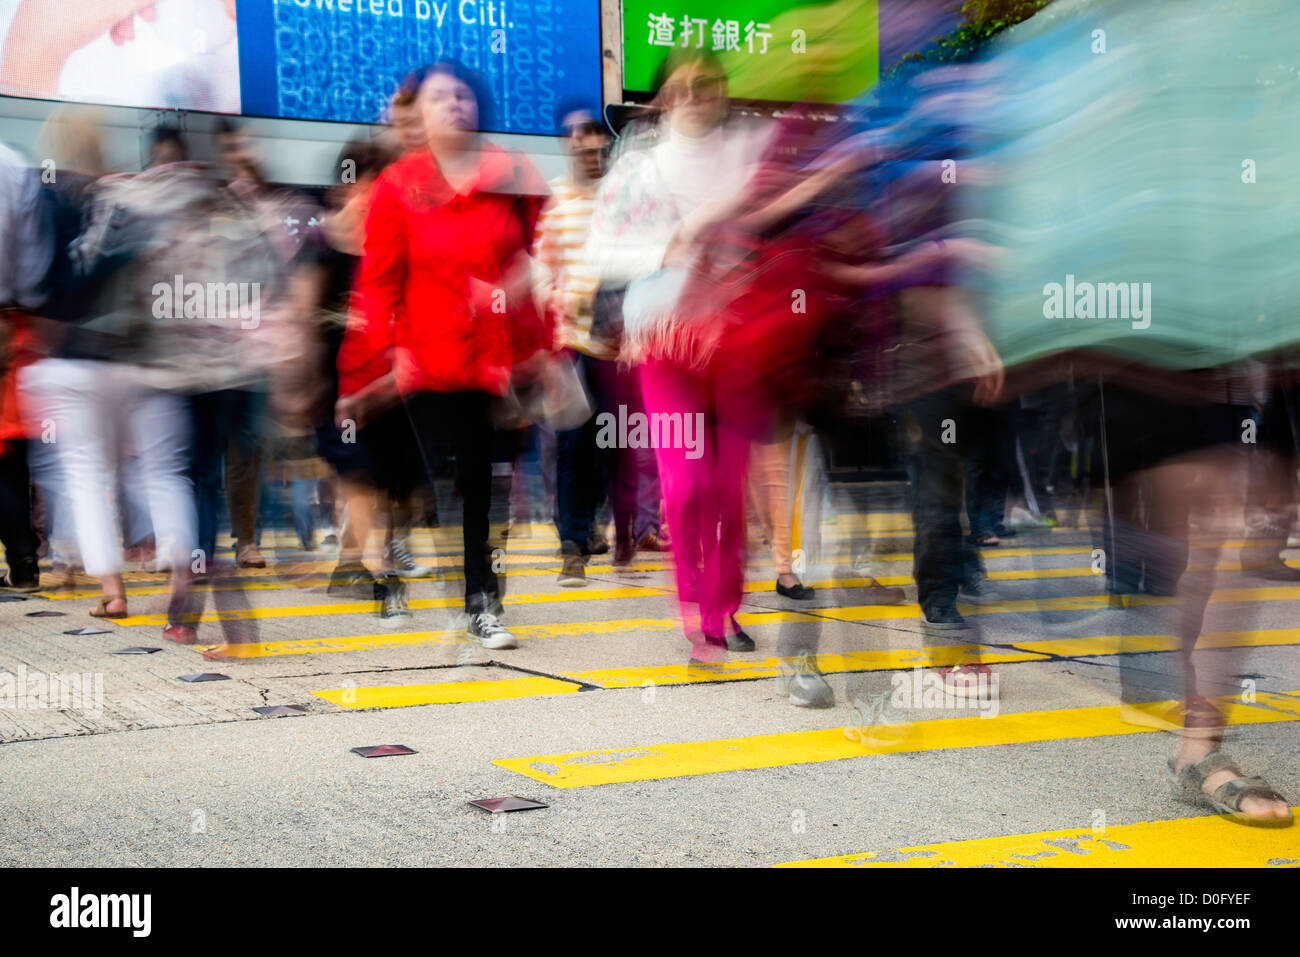 Pedestrians in blurred motion while crossing Nathan Road, Kowloon, Hong Kong, China Stock Photo